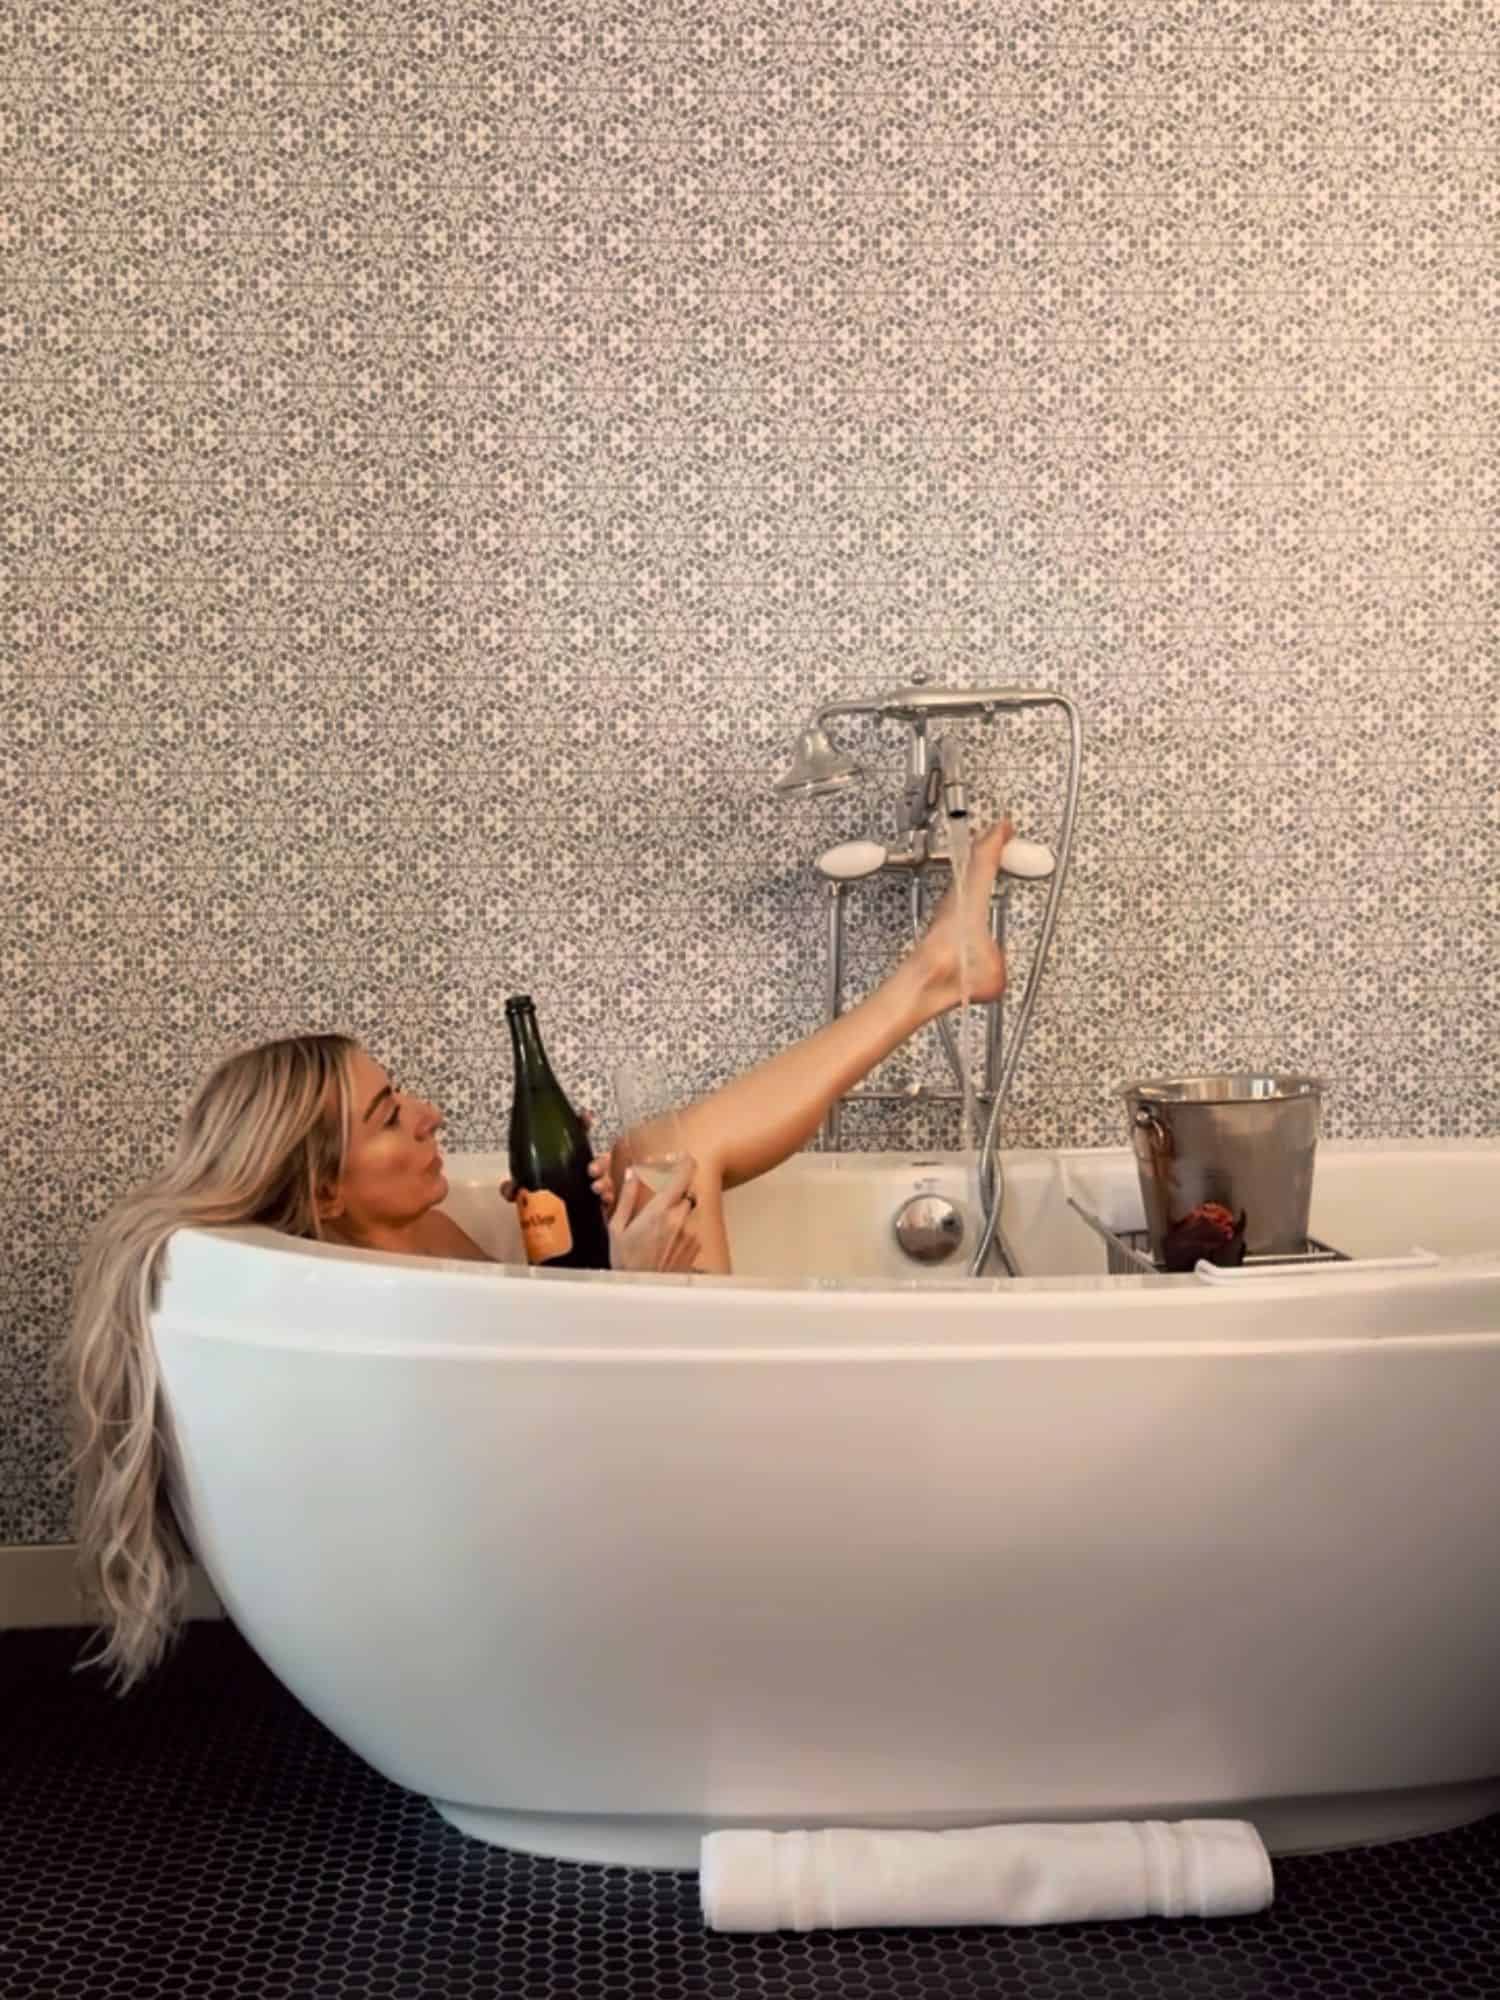 women in the tub with bottle